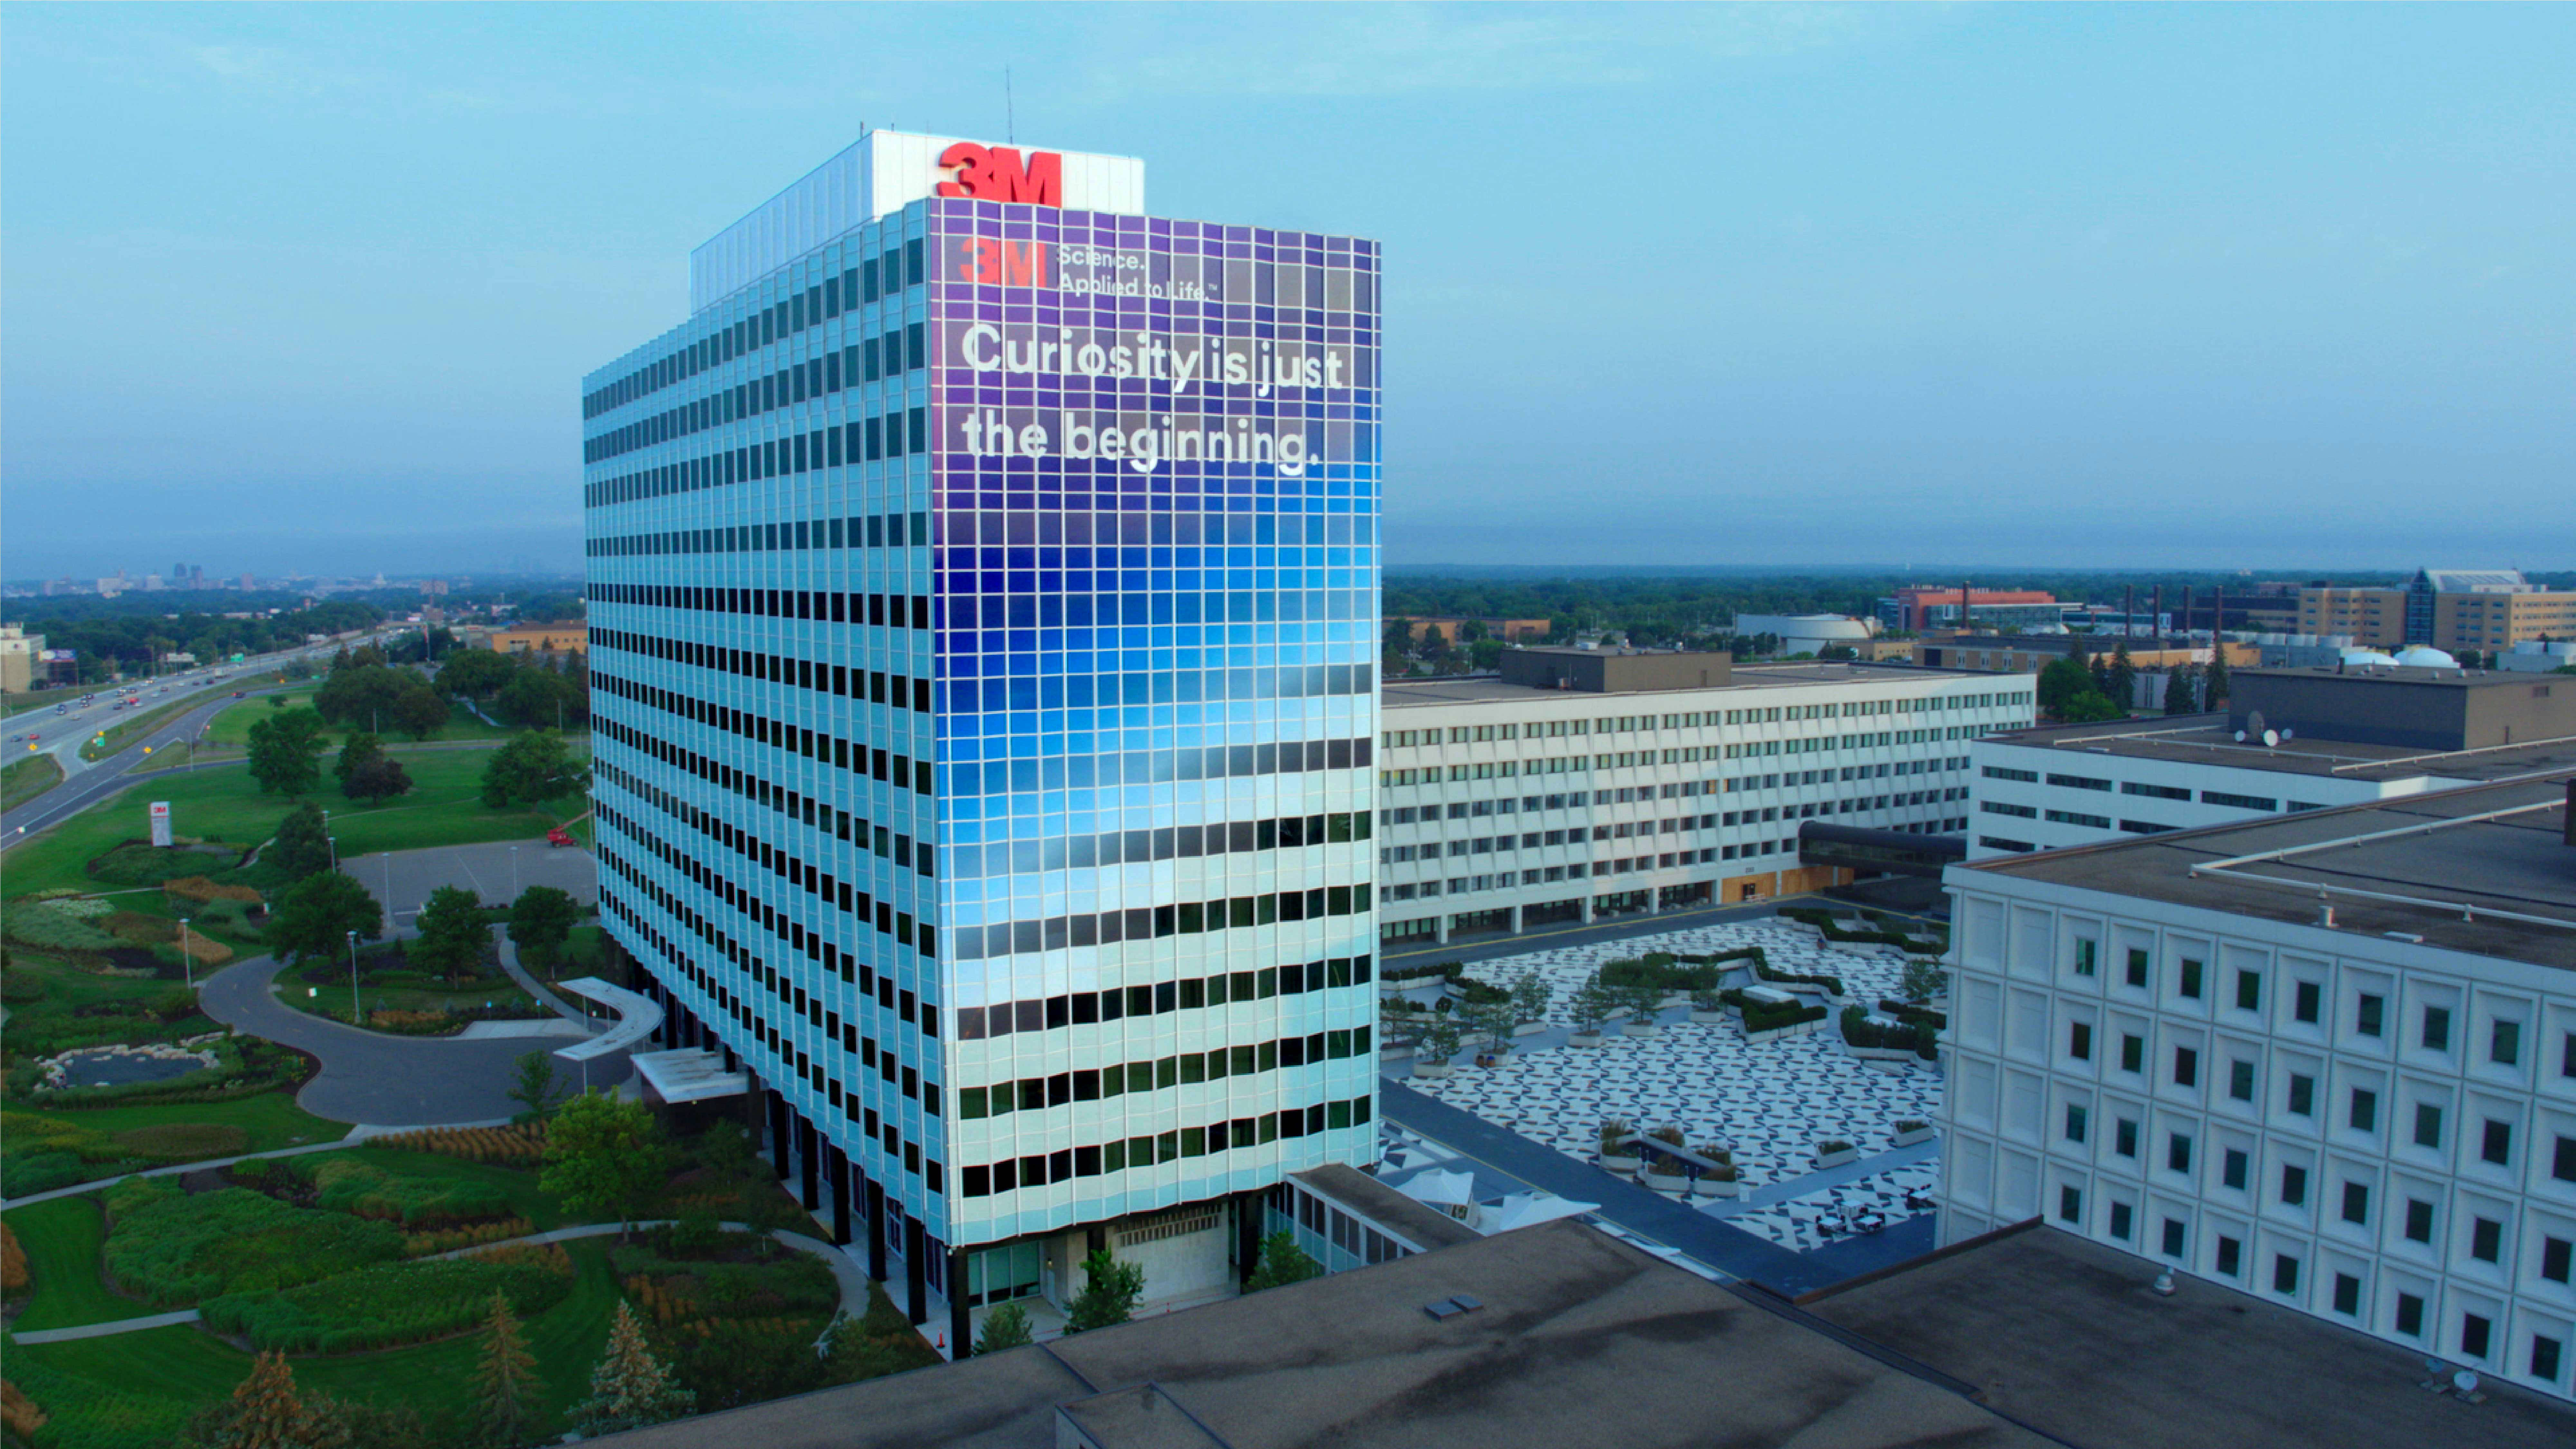 3M Announces 100% Global Renewable Electricity Goal with Headquarters